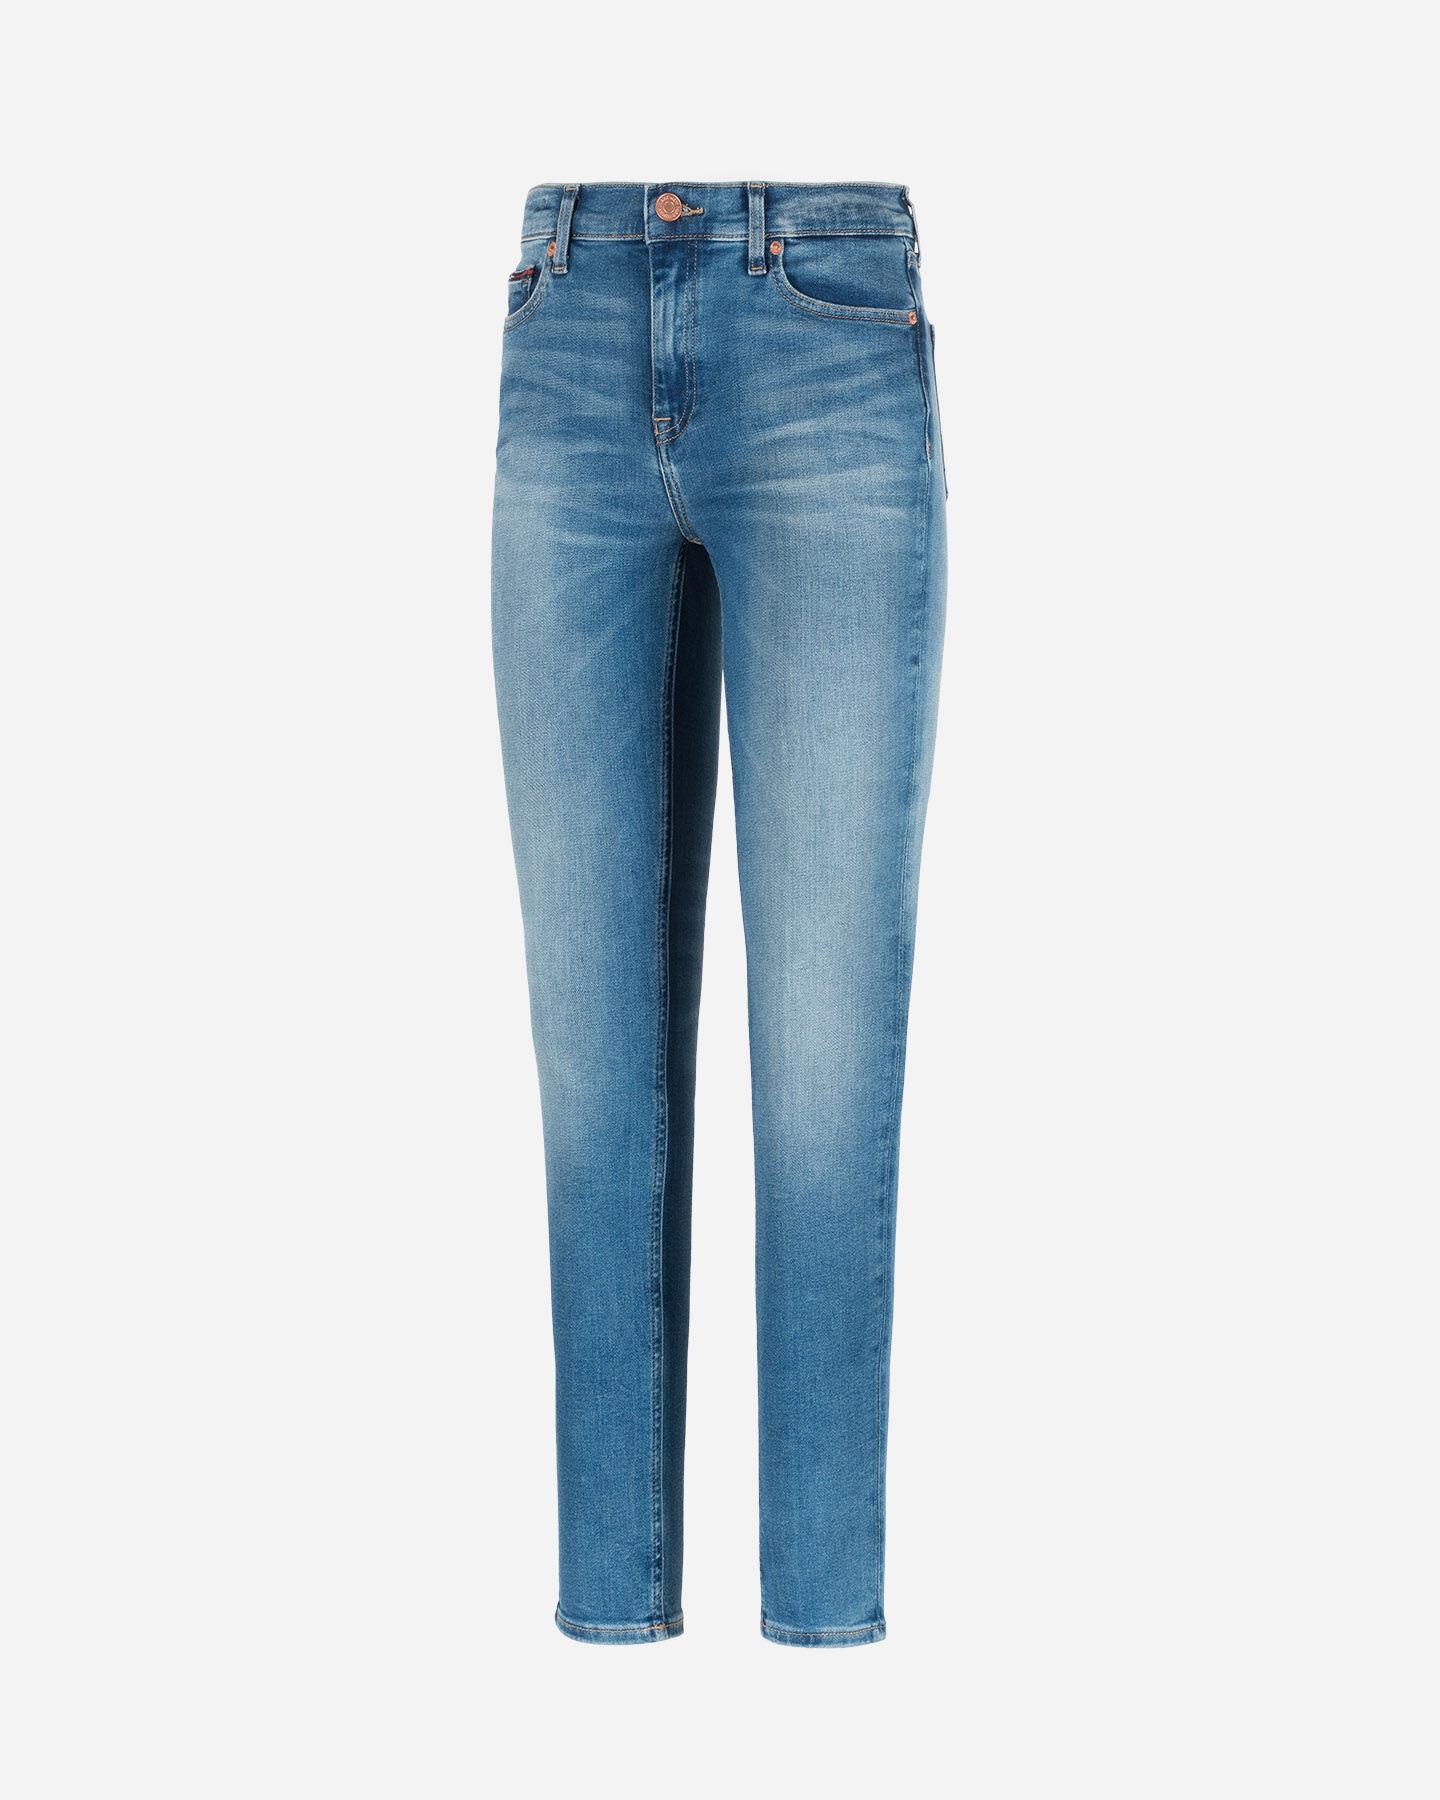  Jeans TOMMY HILFIGER NORA MID RISE SKINNY W S4073585|1AB|27 scatto 0